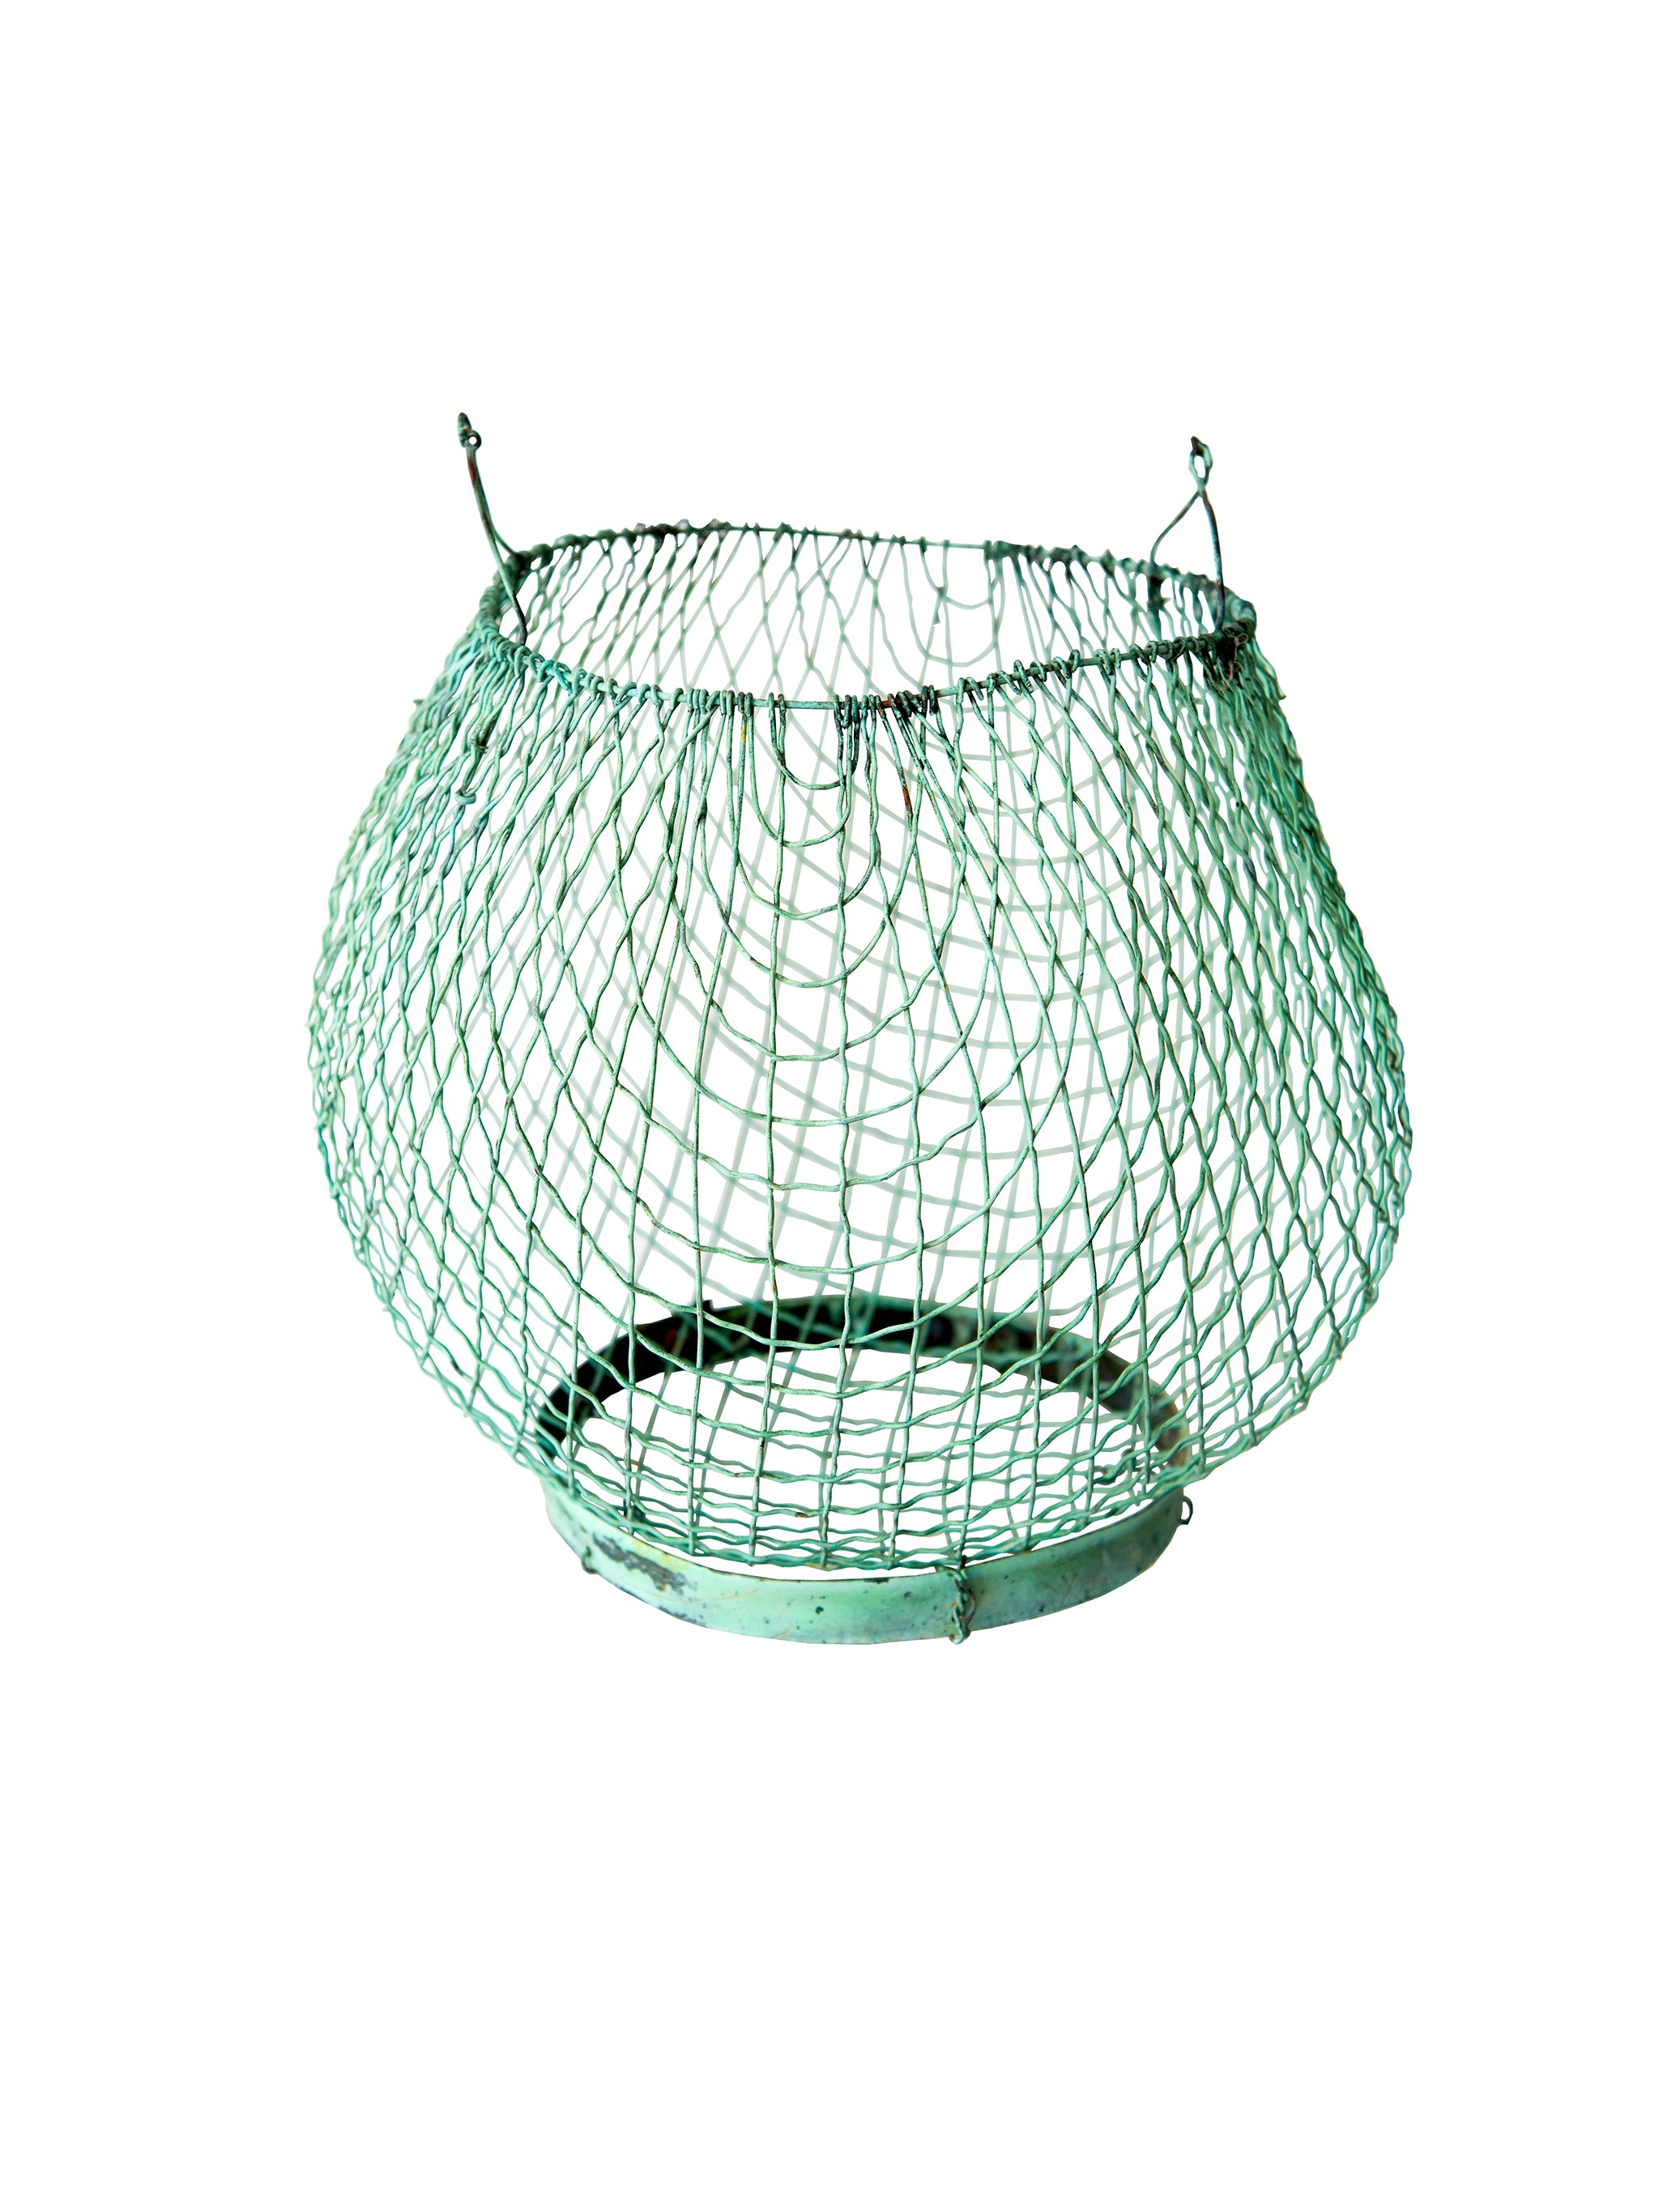 Shop the 1910 French Copper Fish Trap at Weston Table